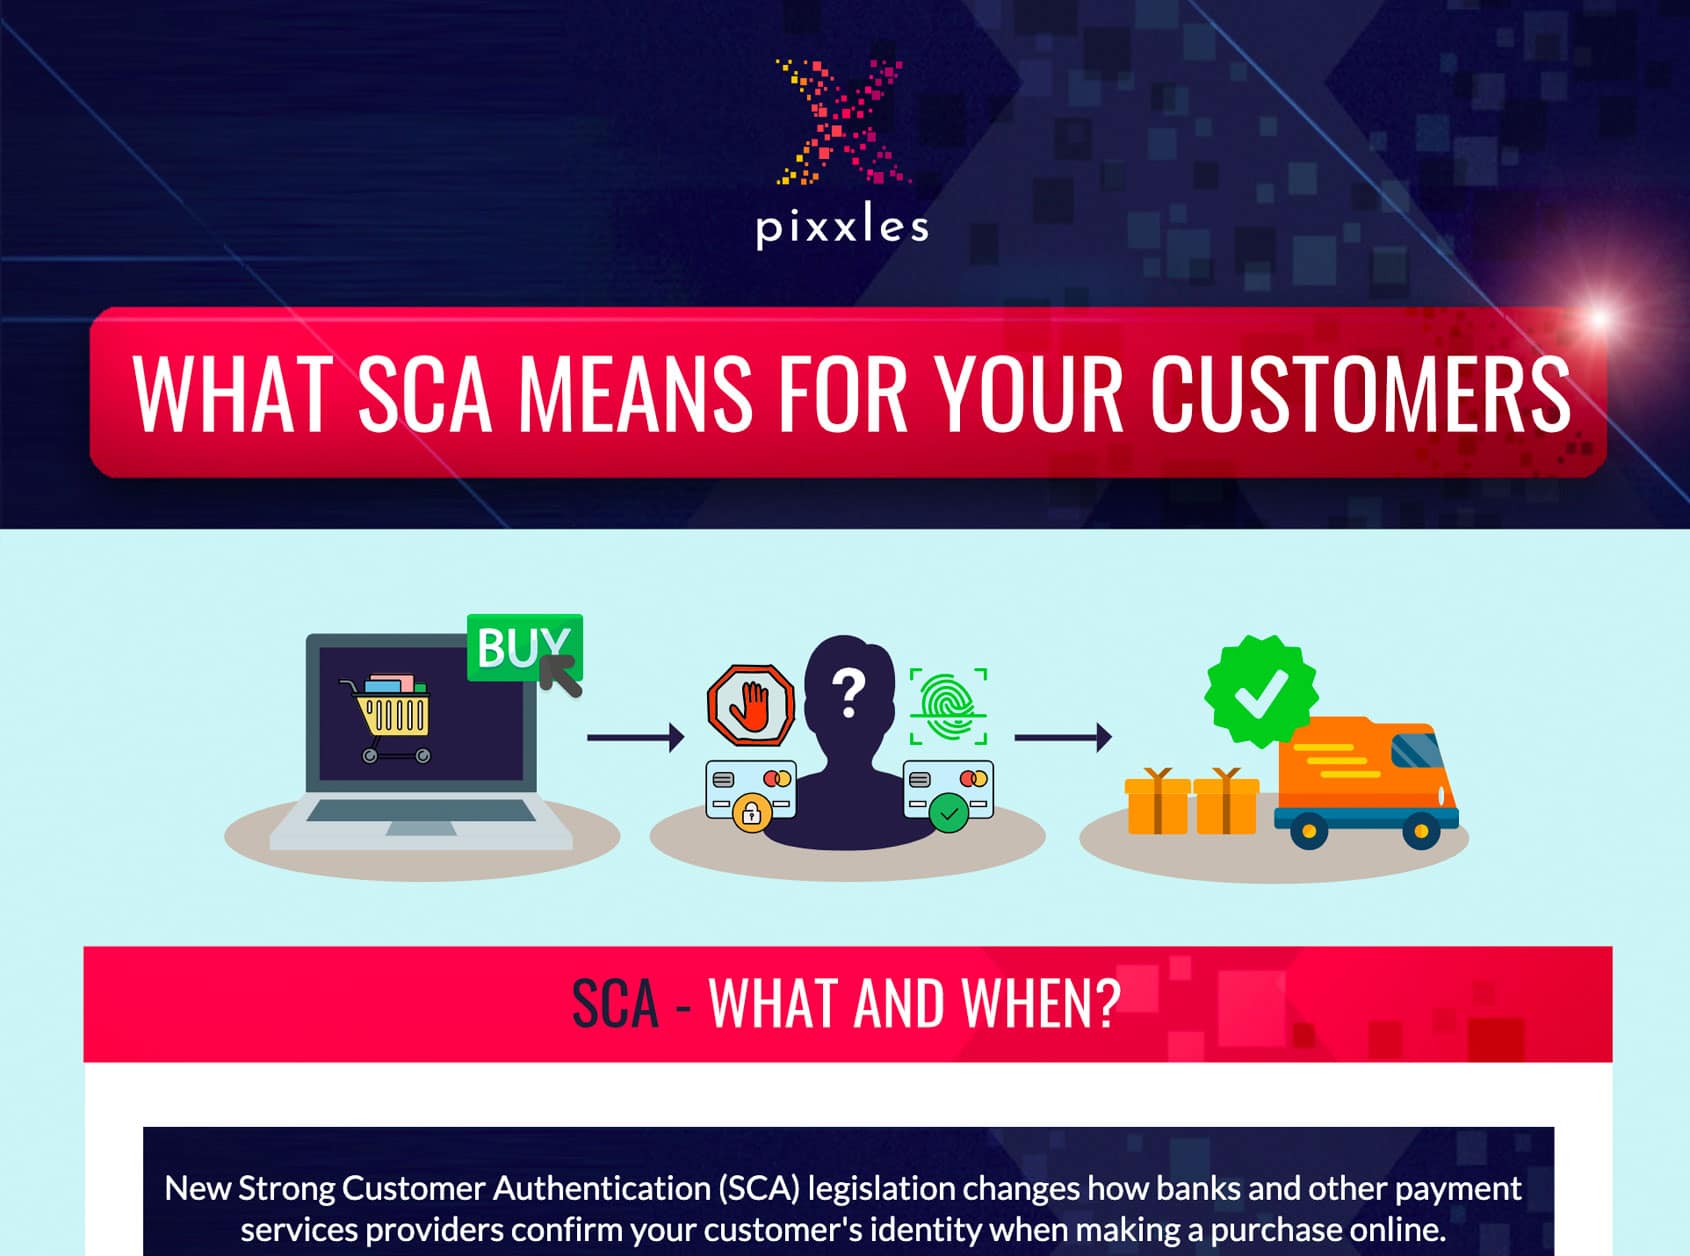 What SCA Means For Your Customers